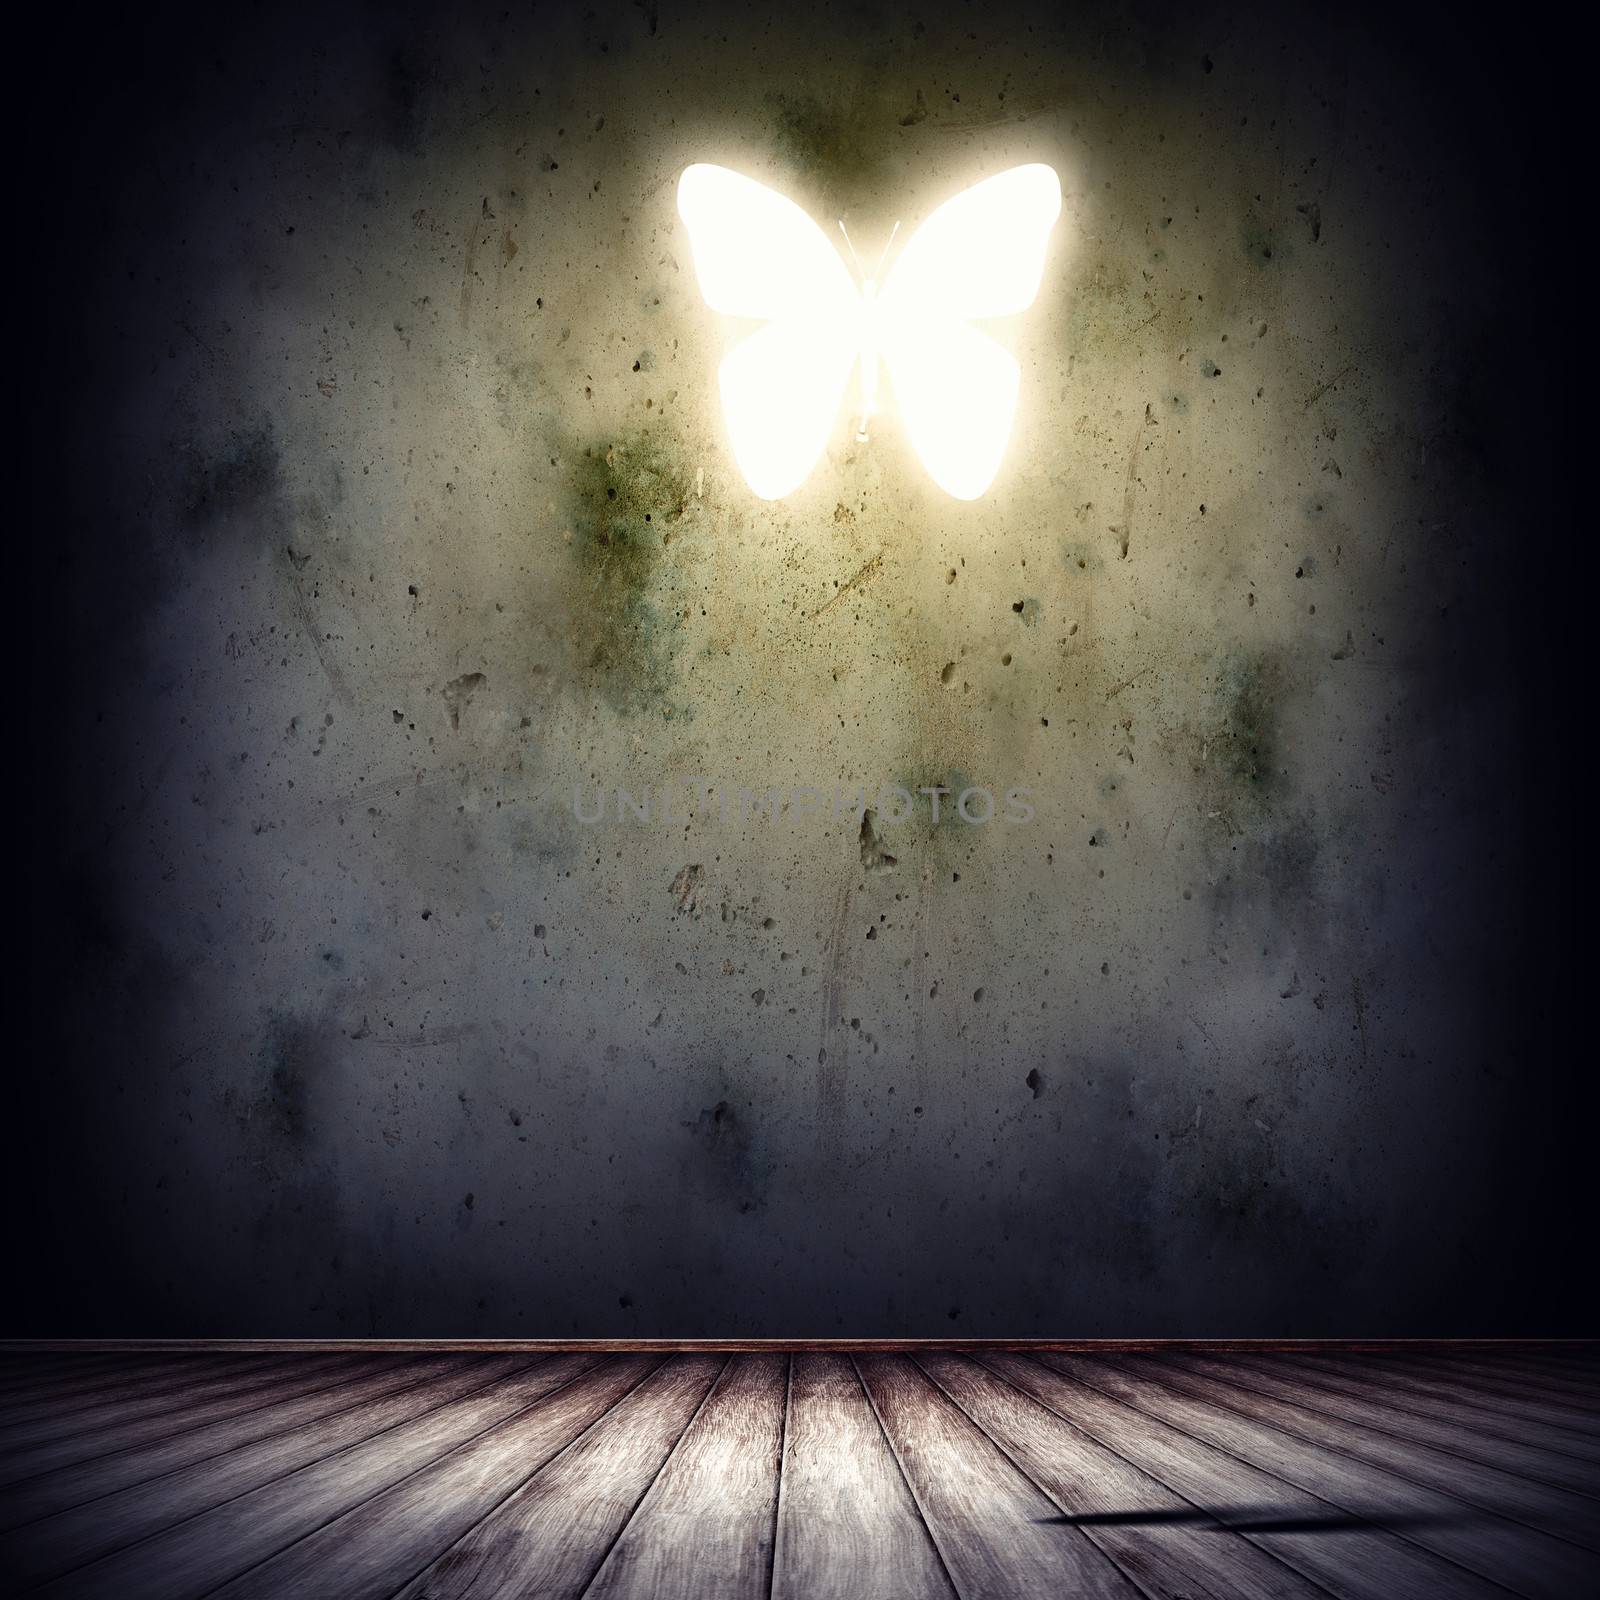 Background image with butterfly illustration by sergey_nivens